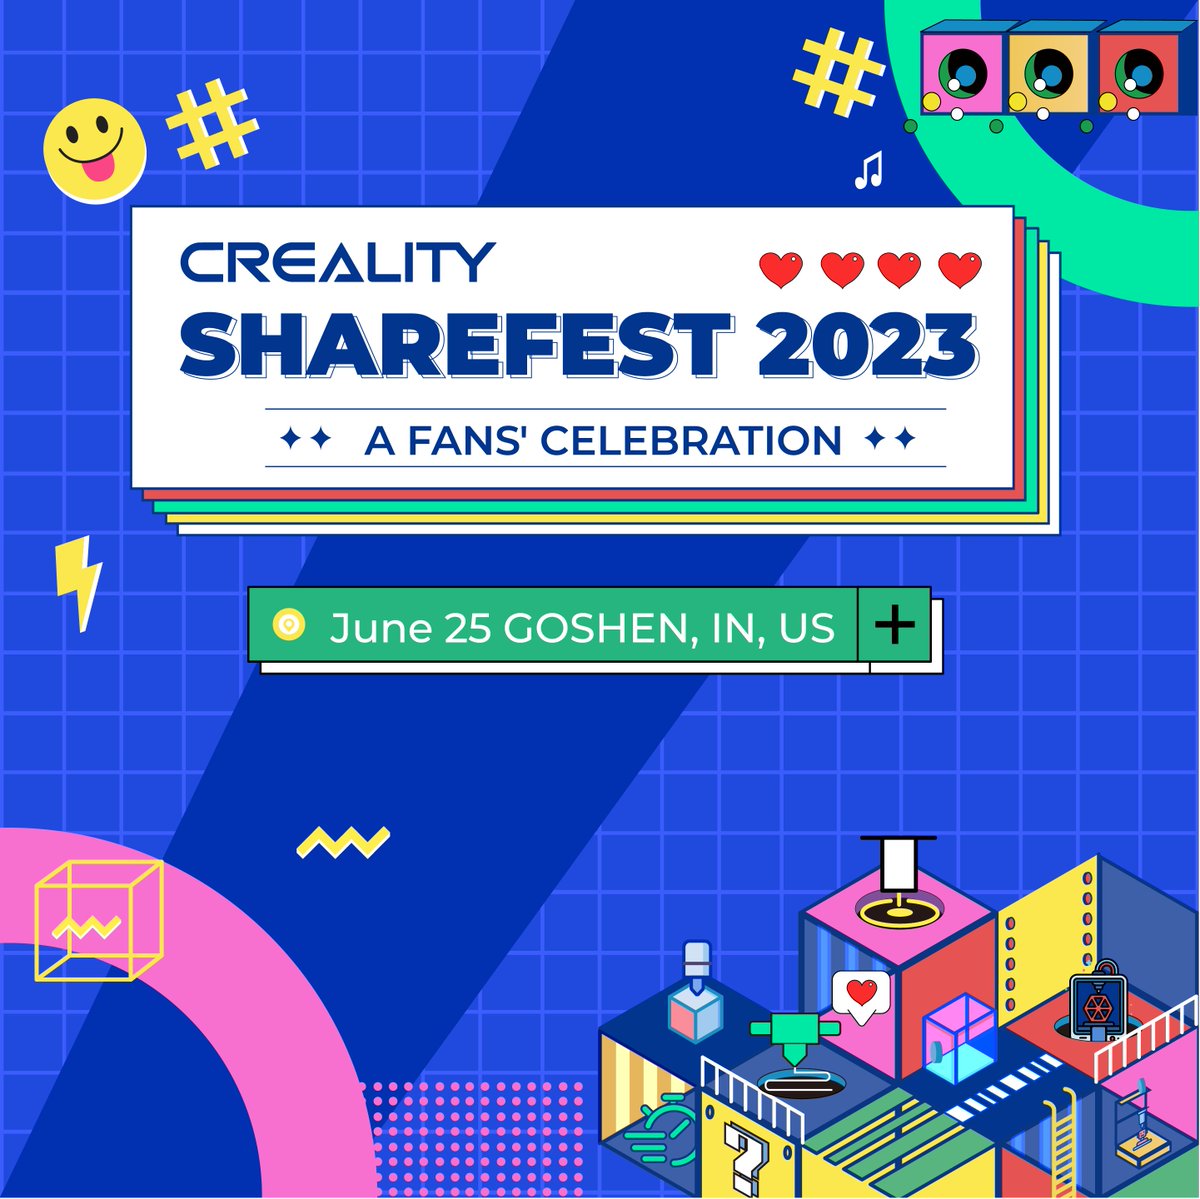 #countingdown 👾👾It's now 10 days to our global party!
Dust your bag and plan your trip! Do come and meet us!

What do you expect this Ender-3 S1 Pro turning to be?
#sharefest2023 #creality #3dprintint #crealityk1 #crealityk1max #halotmagepro #ender #MRRF #ender3s1pro